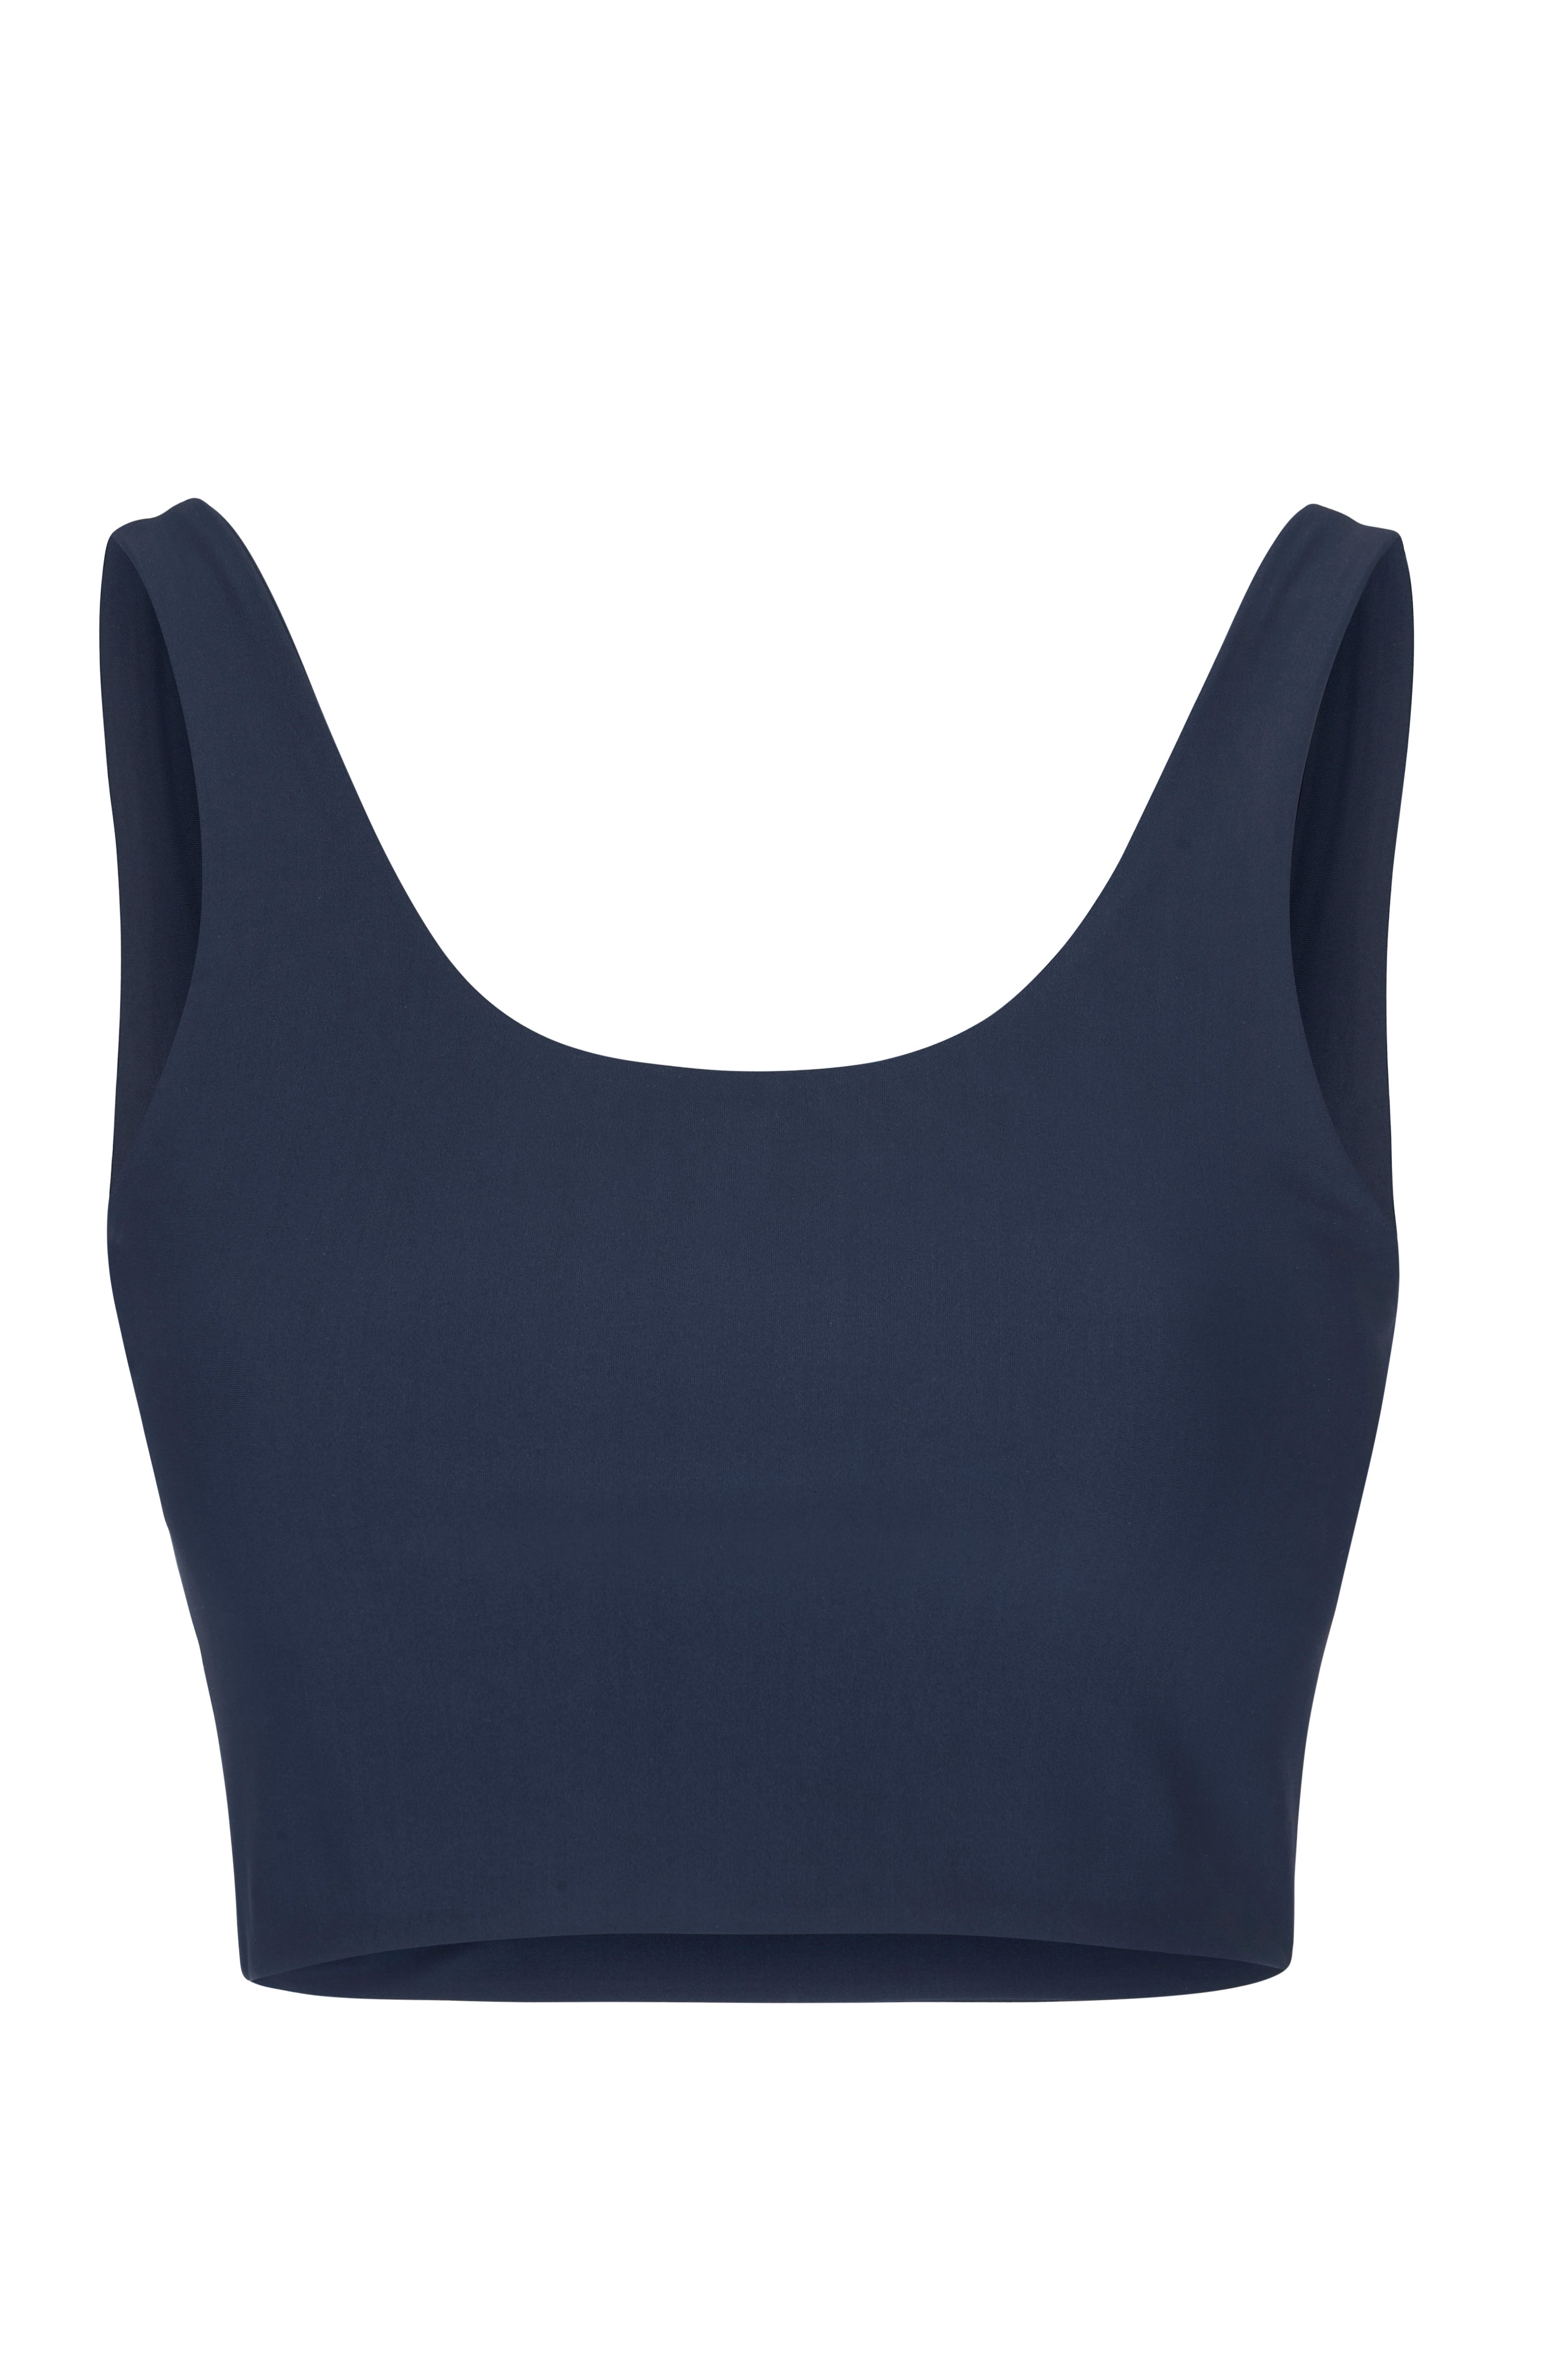 Sisterly Tribe - Midi Scoop Bra Navy. Light to medium support, Feminine and minimalistic design, Buttery Soft and light, matte fabric.